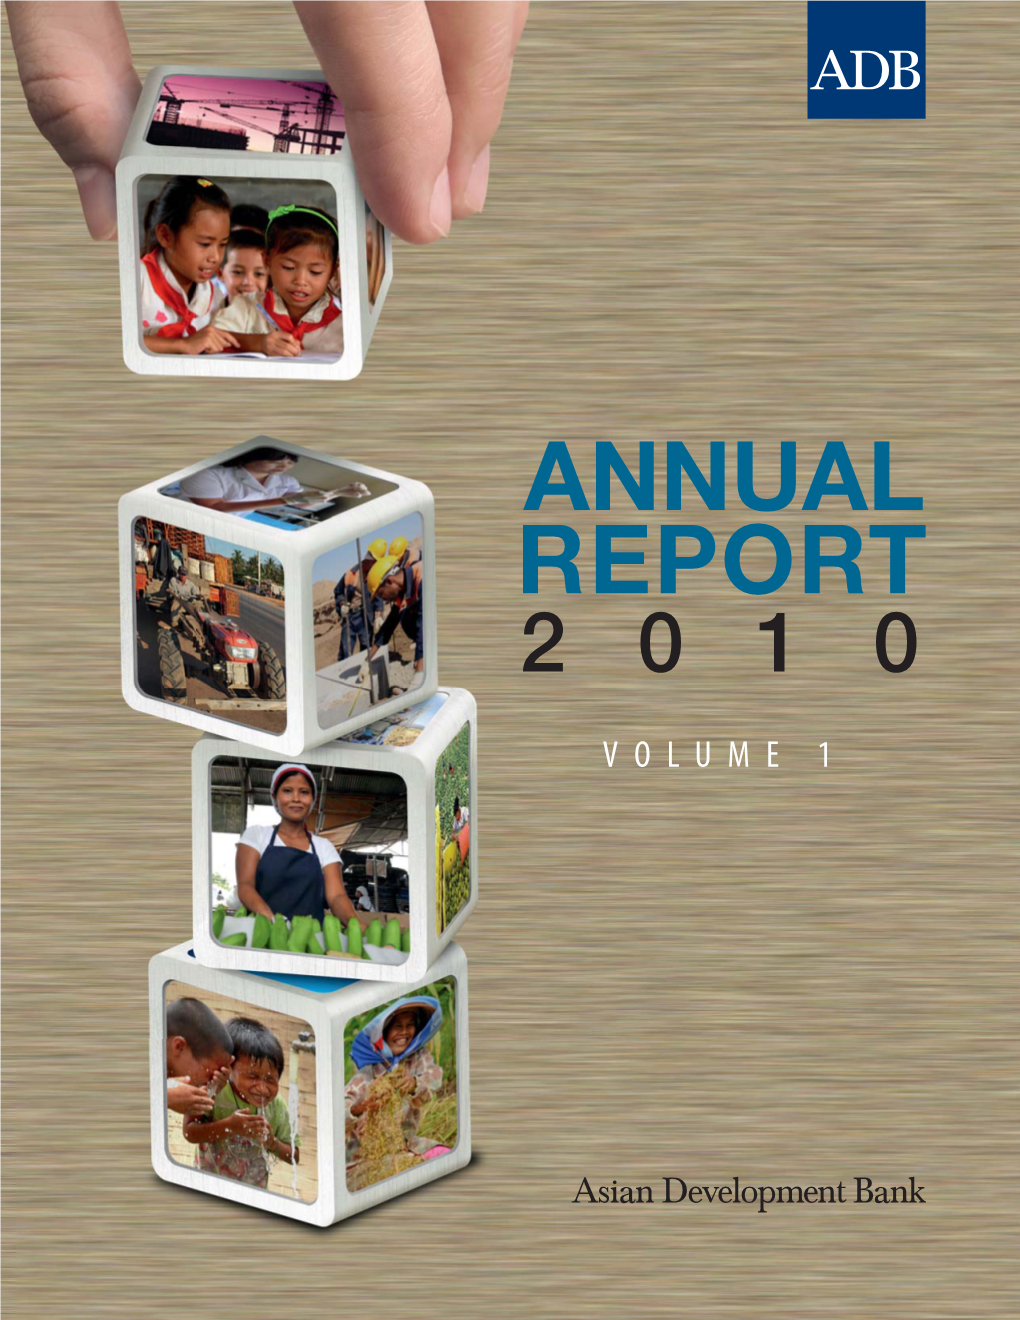 ADB Annual Report 2010 Comprises Two Separate Volumes: Volume 1 Is the Main Report and Volume 2 Contains the Financial Statements and Statistical Annexes